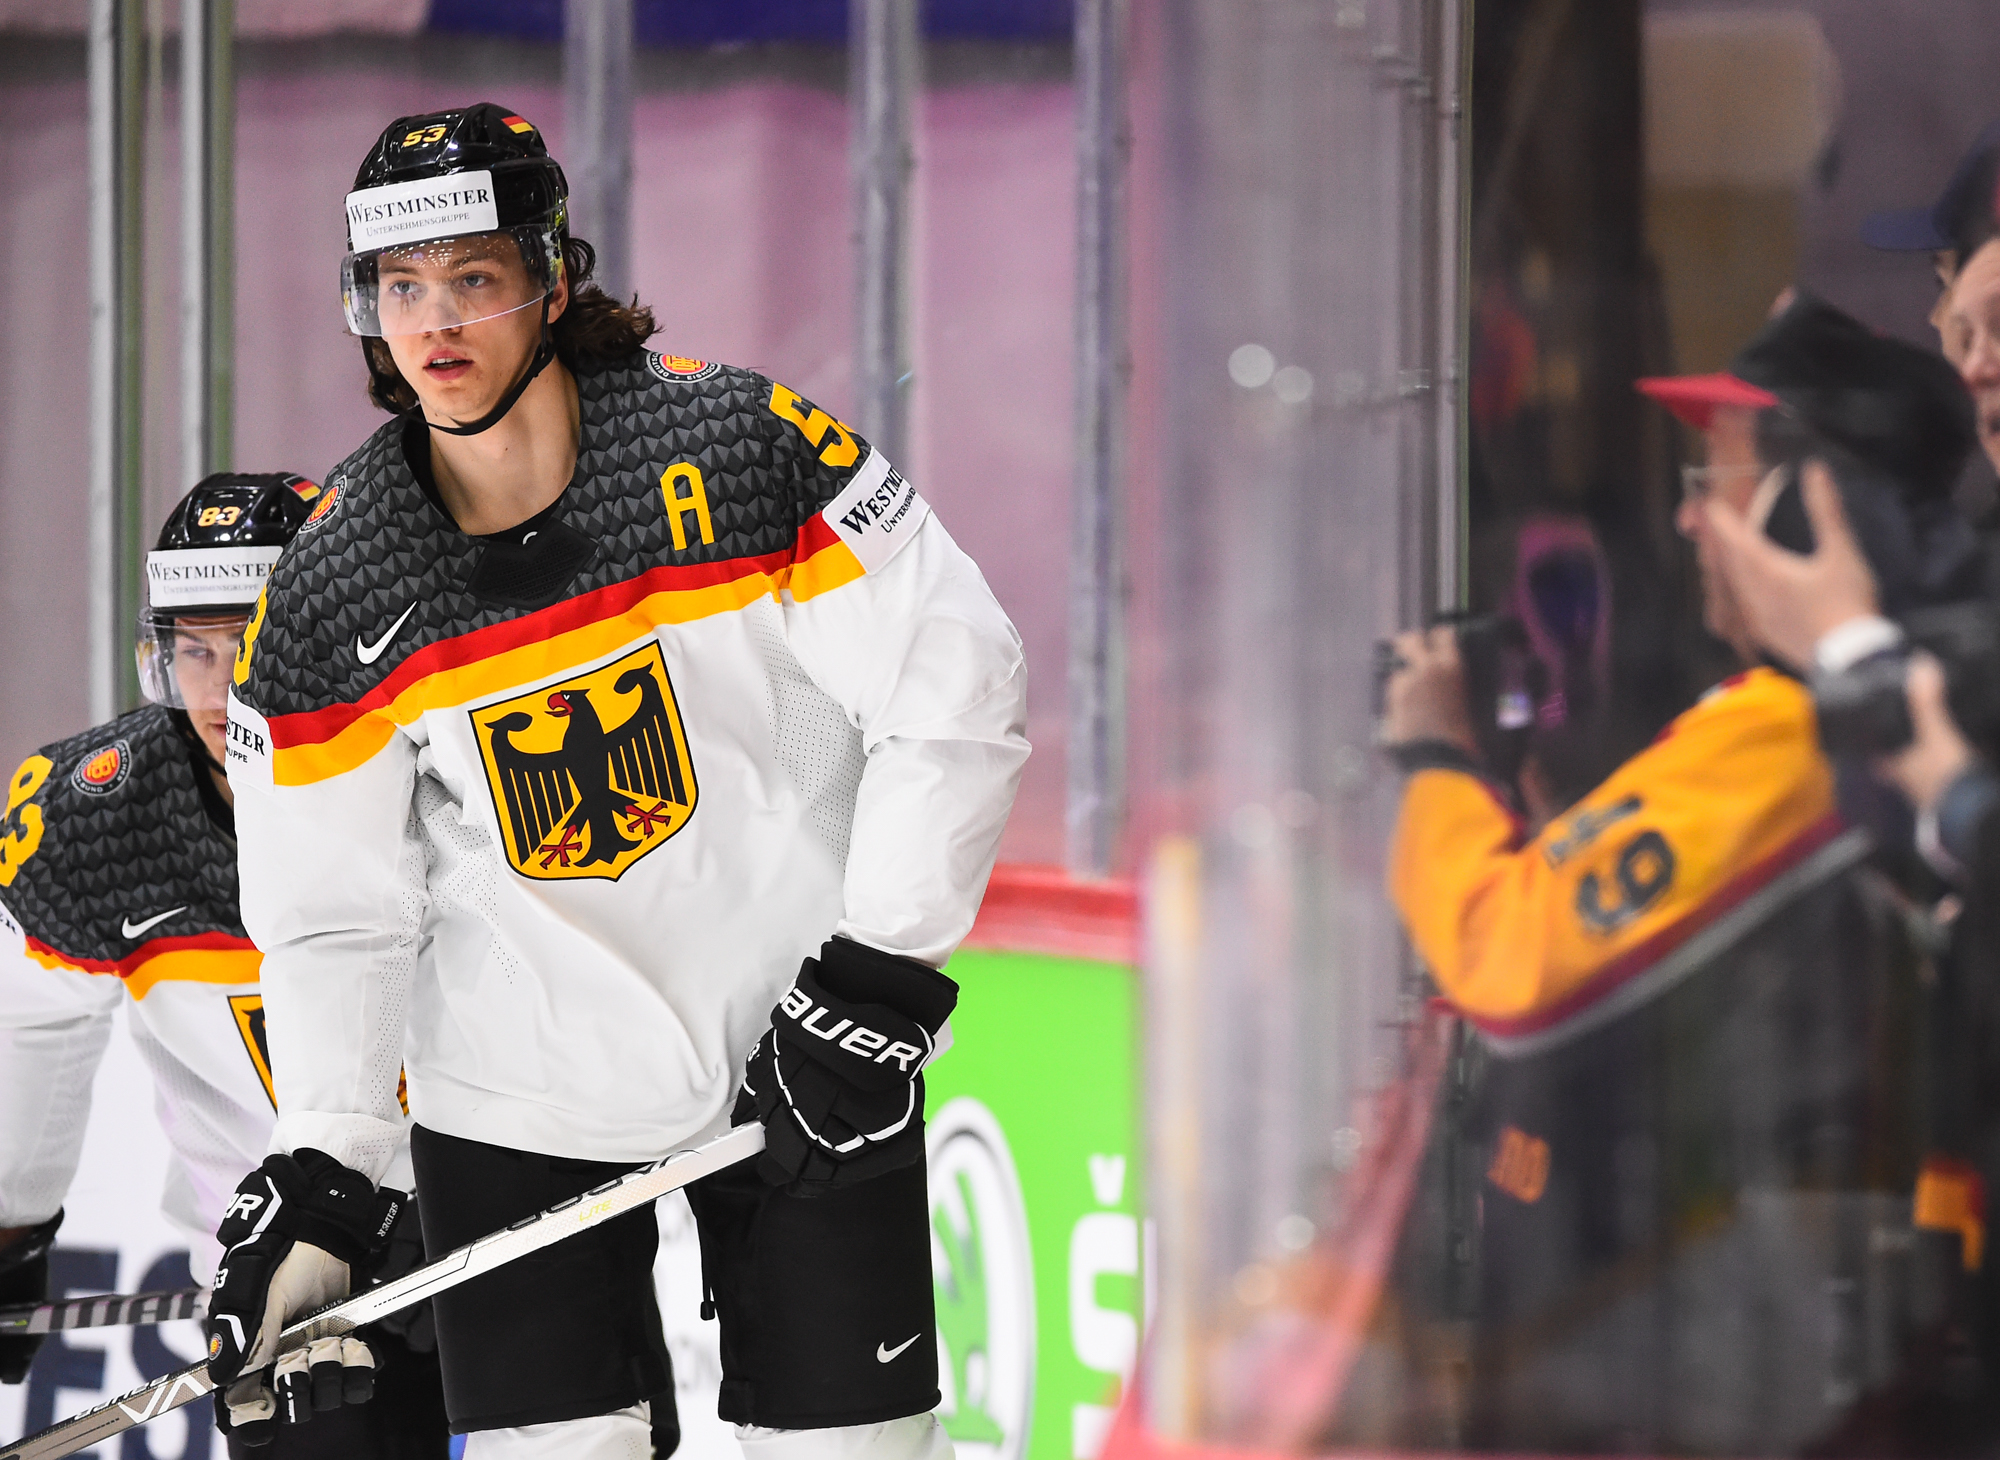 Moritz Seider (GER) in action during the 2021 IIHF Ice Hockey